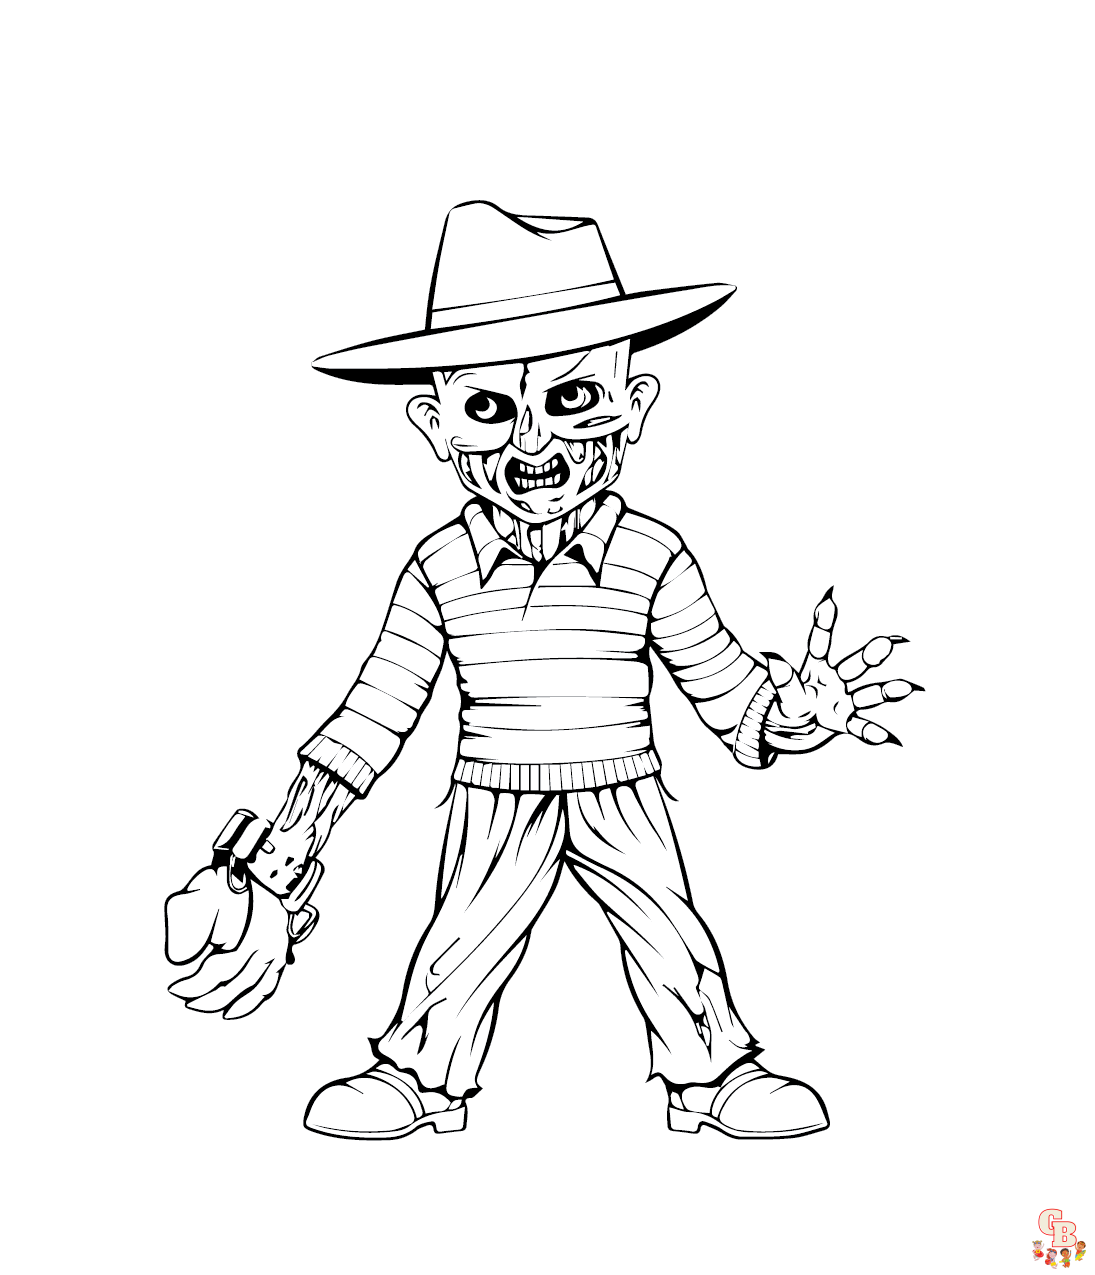 Printable freddy krueger coloring pages free for kids and adults